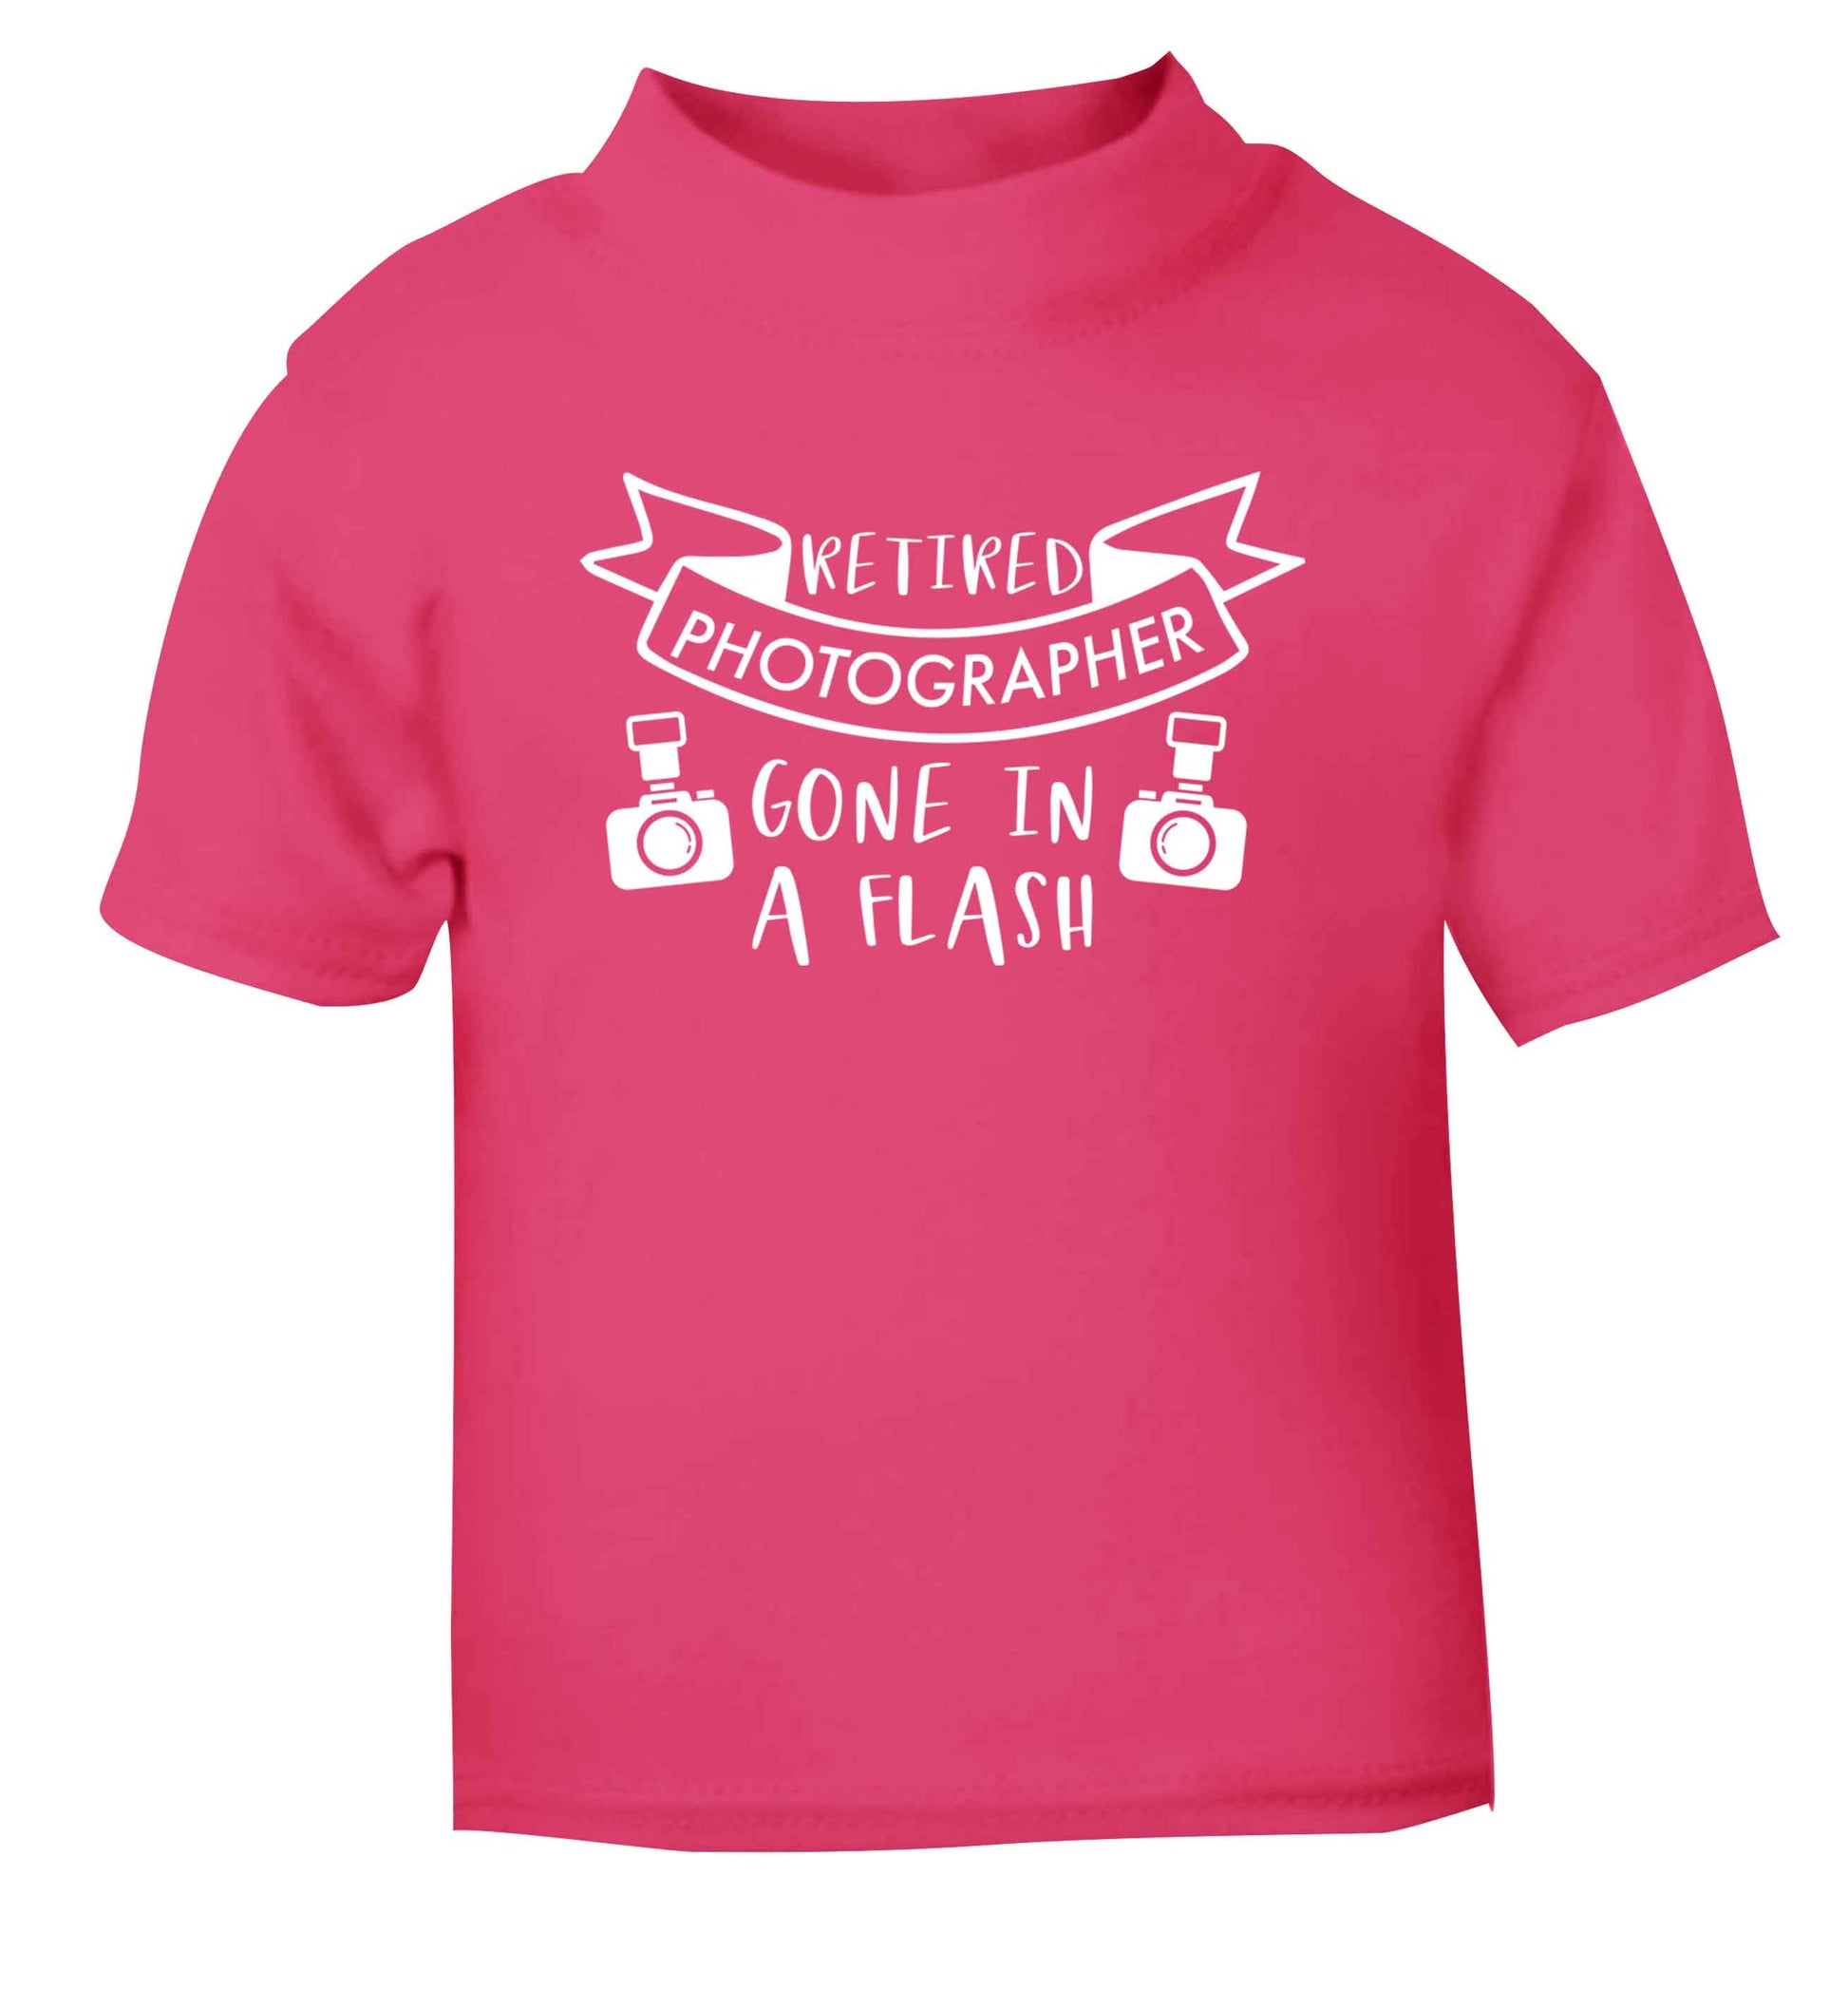 Retired photographer gone in a flash pink Baby Toddler Tshirt 2 Years